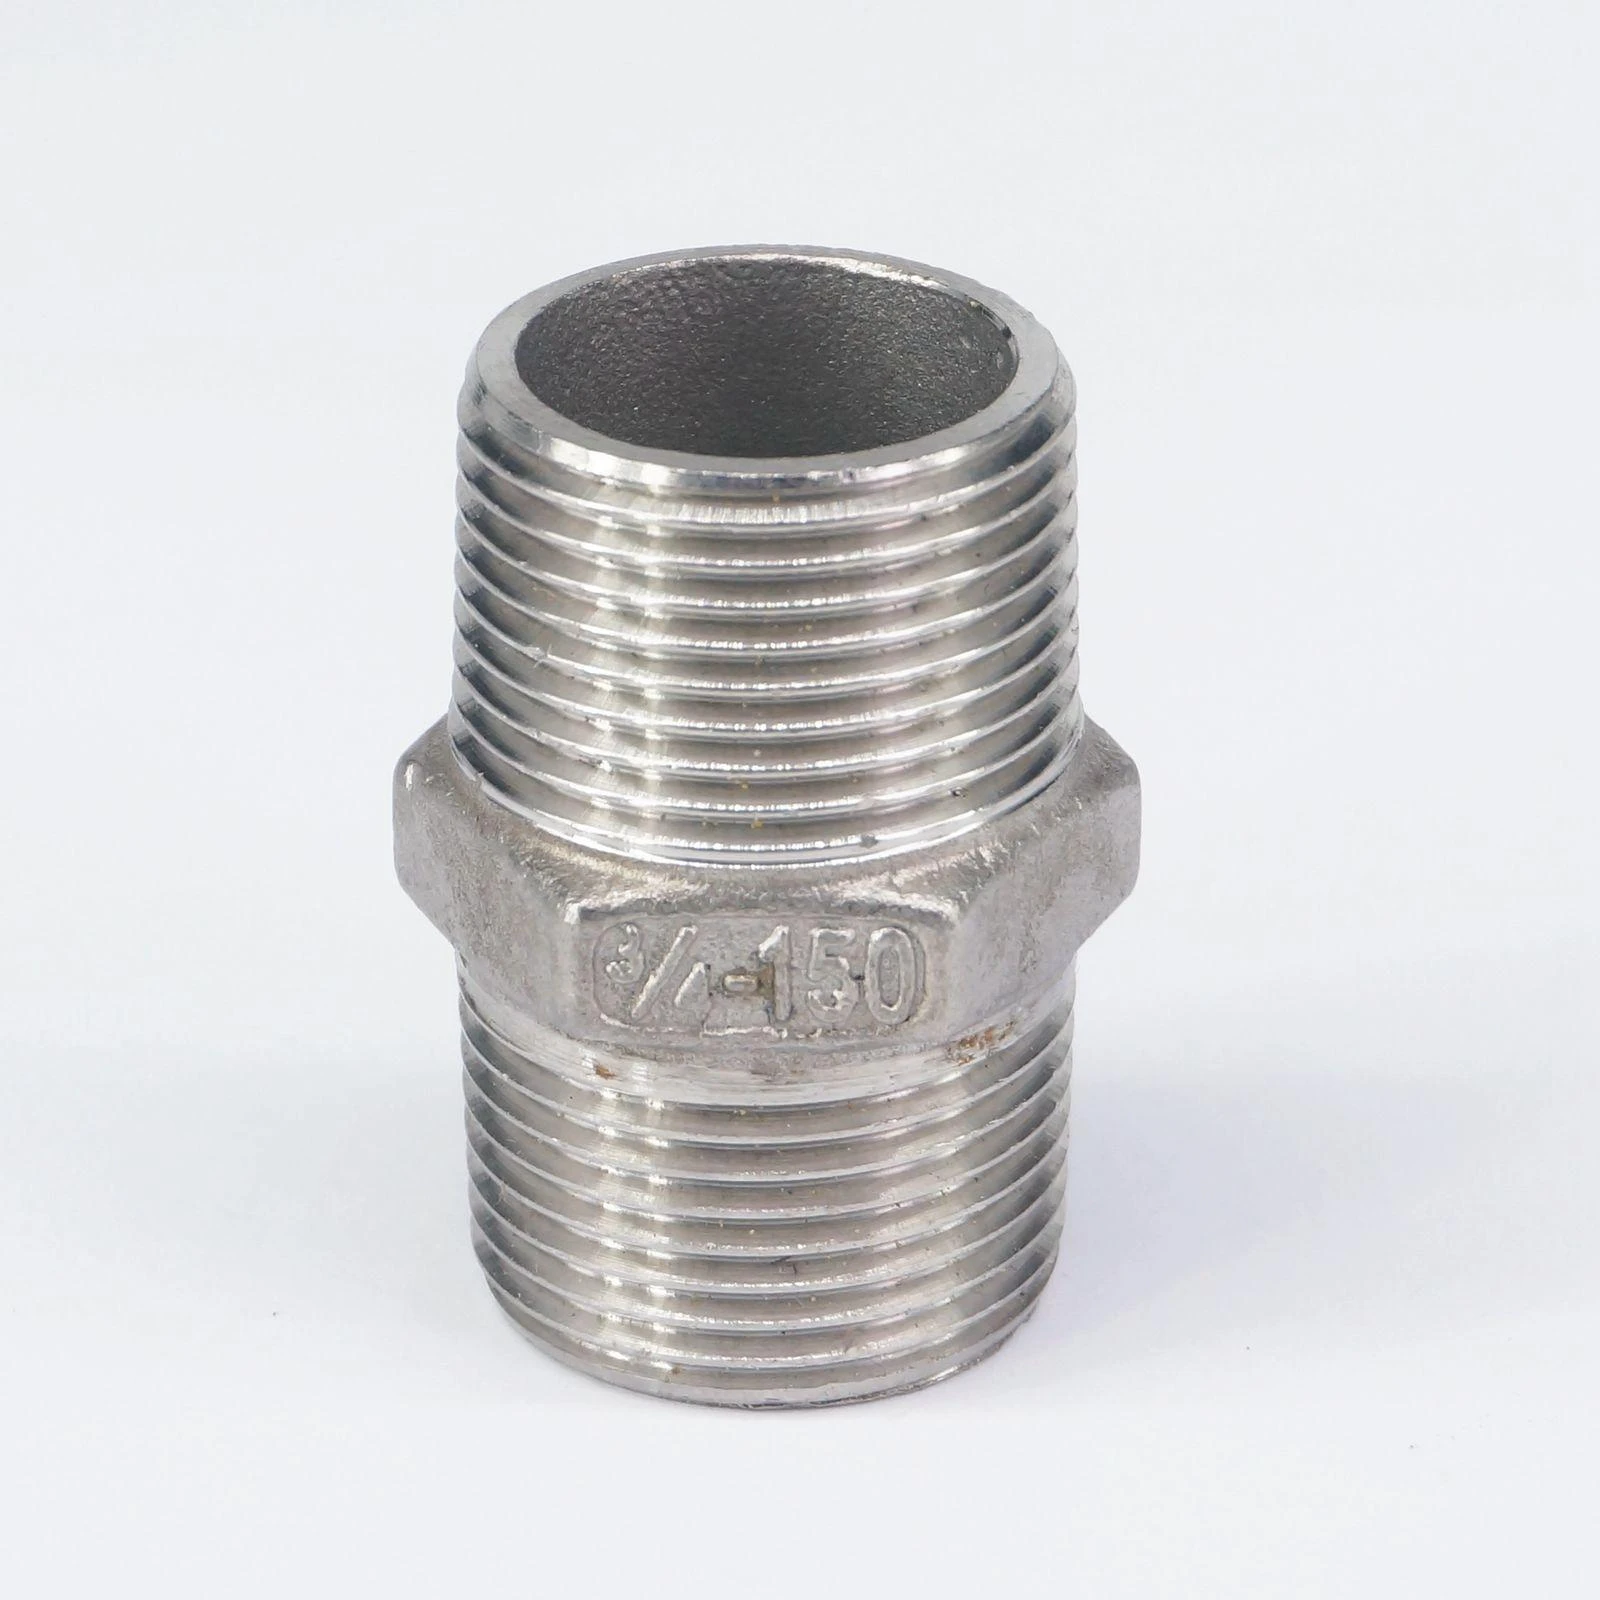 3/4" Male x 3/4" Male Nipple Stainless Steel 304 Threaded Pipe Fitting BSPT UK